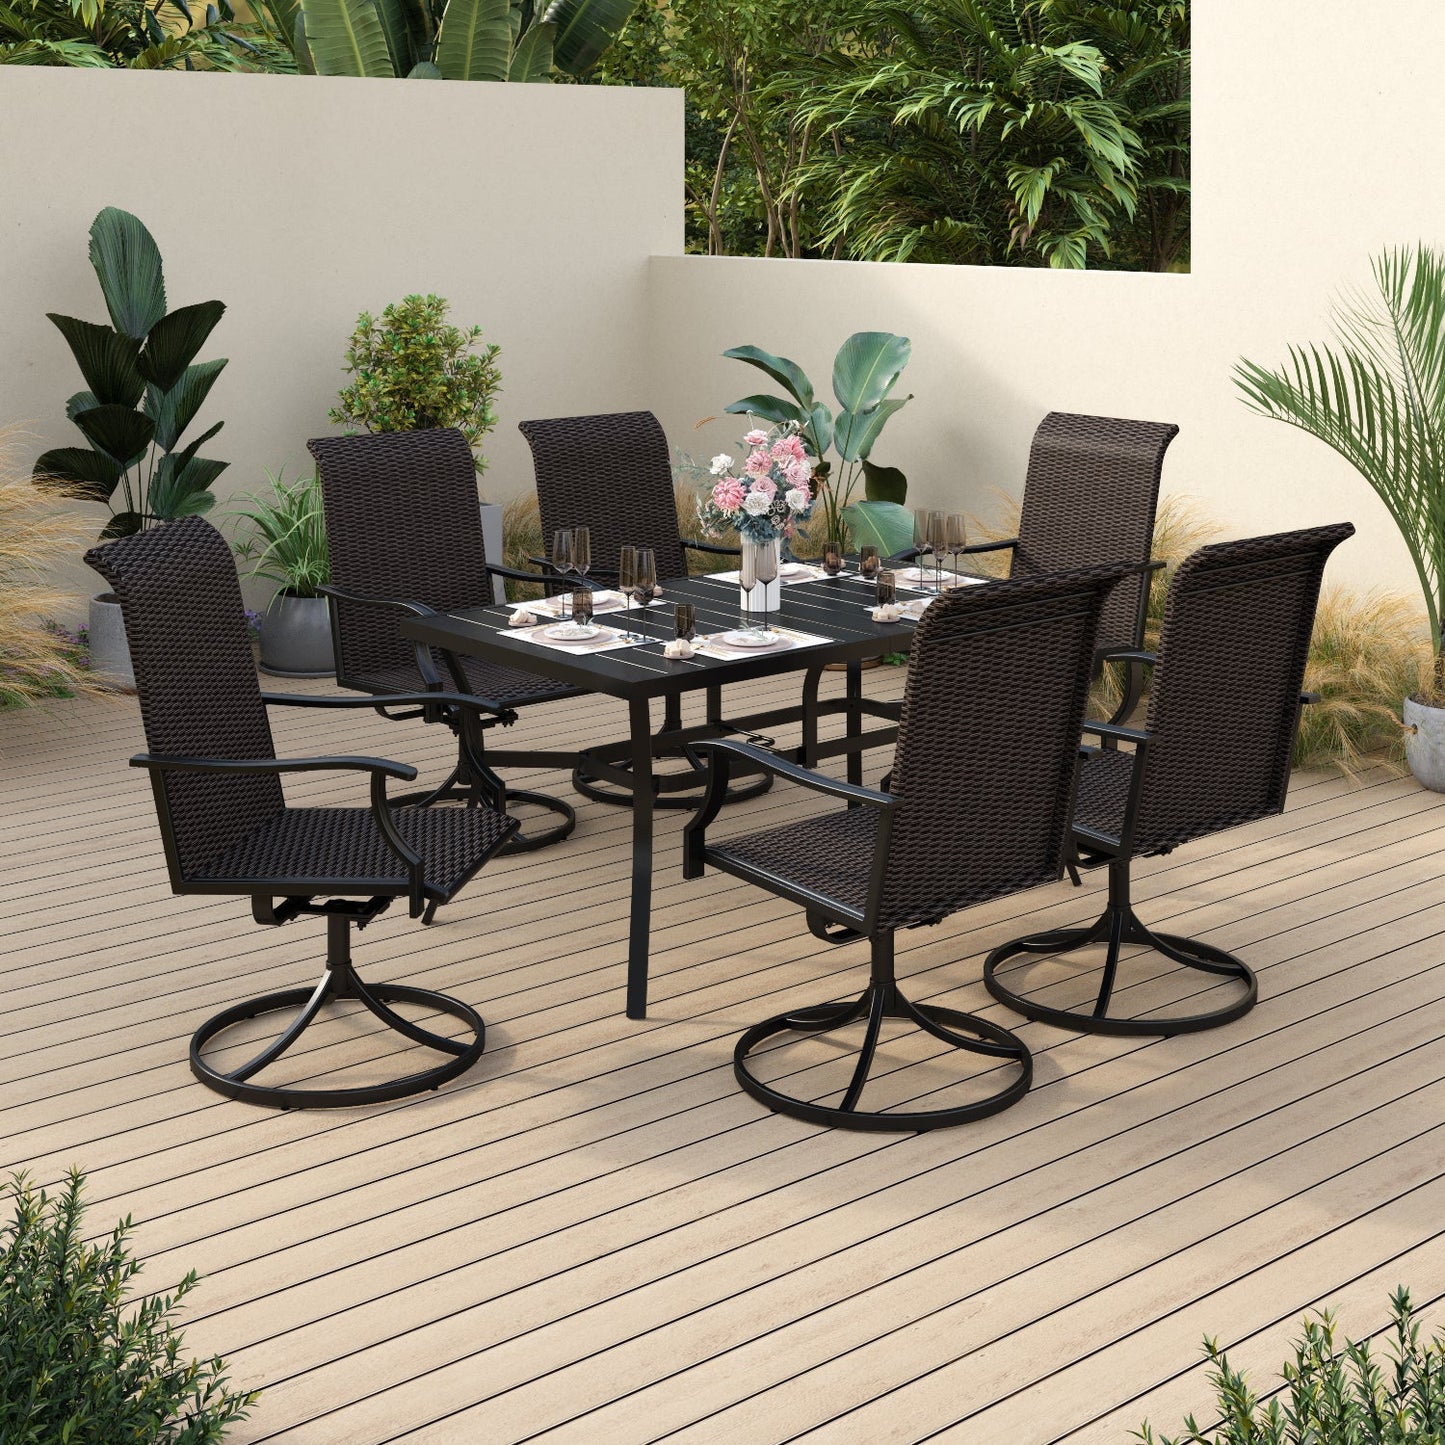 Sophia & William 7 Pieces Outdoor Patio Furniture Dining Set High Back Swivel Dining Chairs and Metal Dining Table